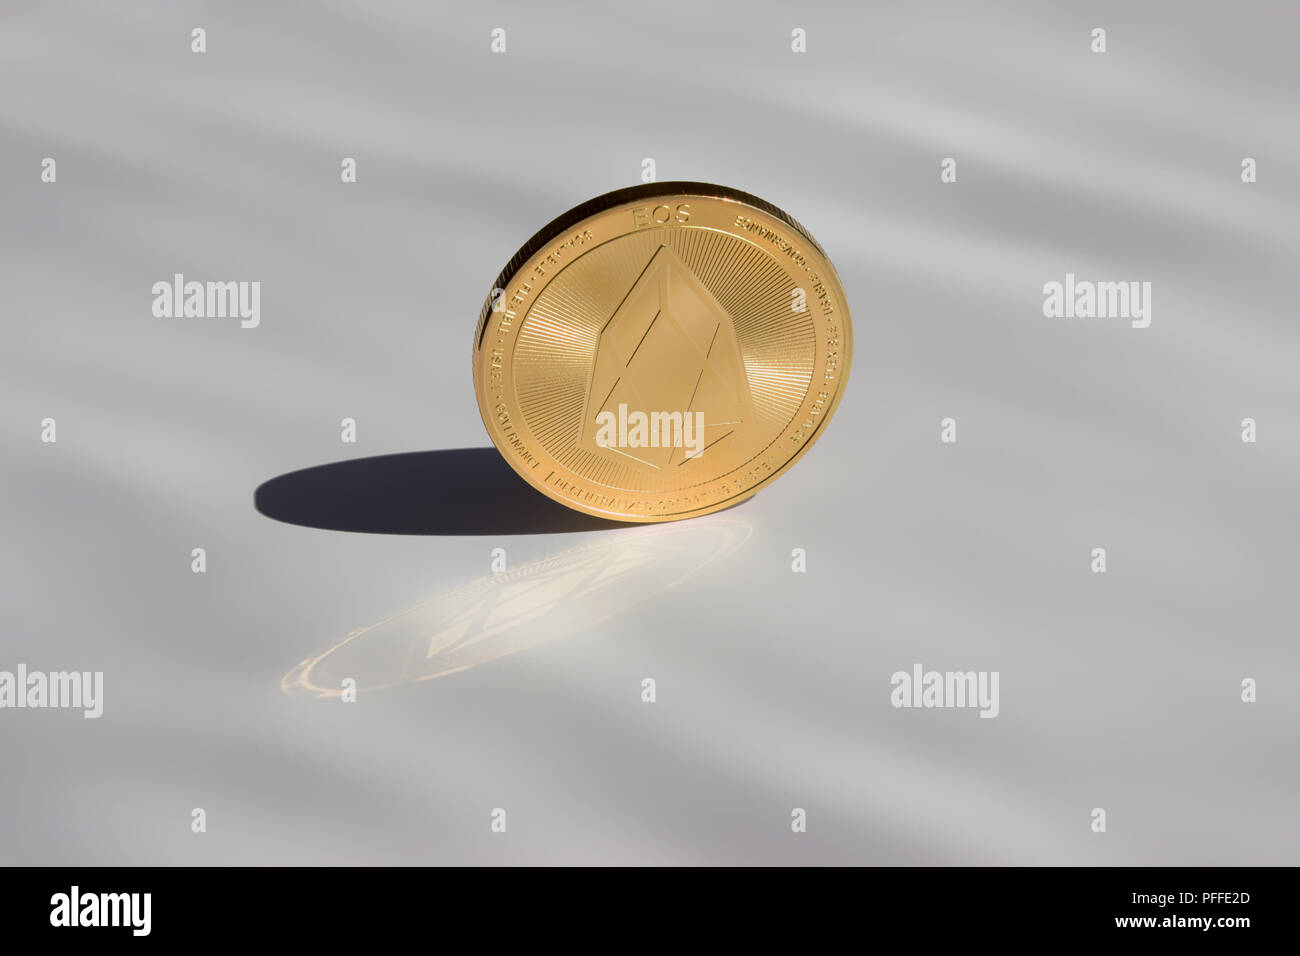 On a white gray background is coin of a digital crypto  currency - eos and their reflection and shadow. Stock Photo